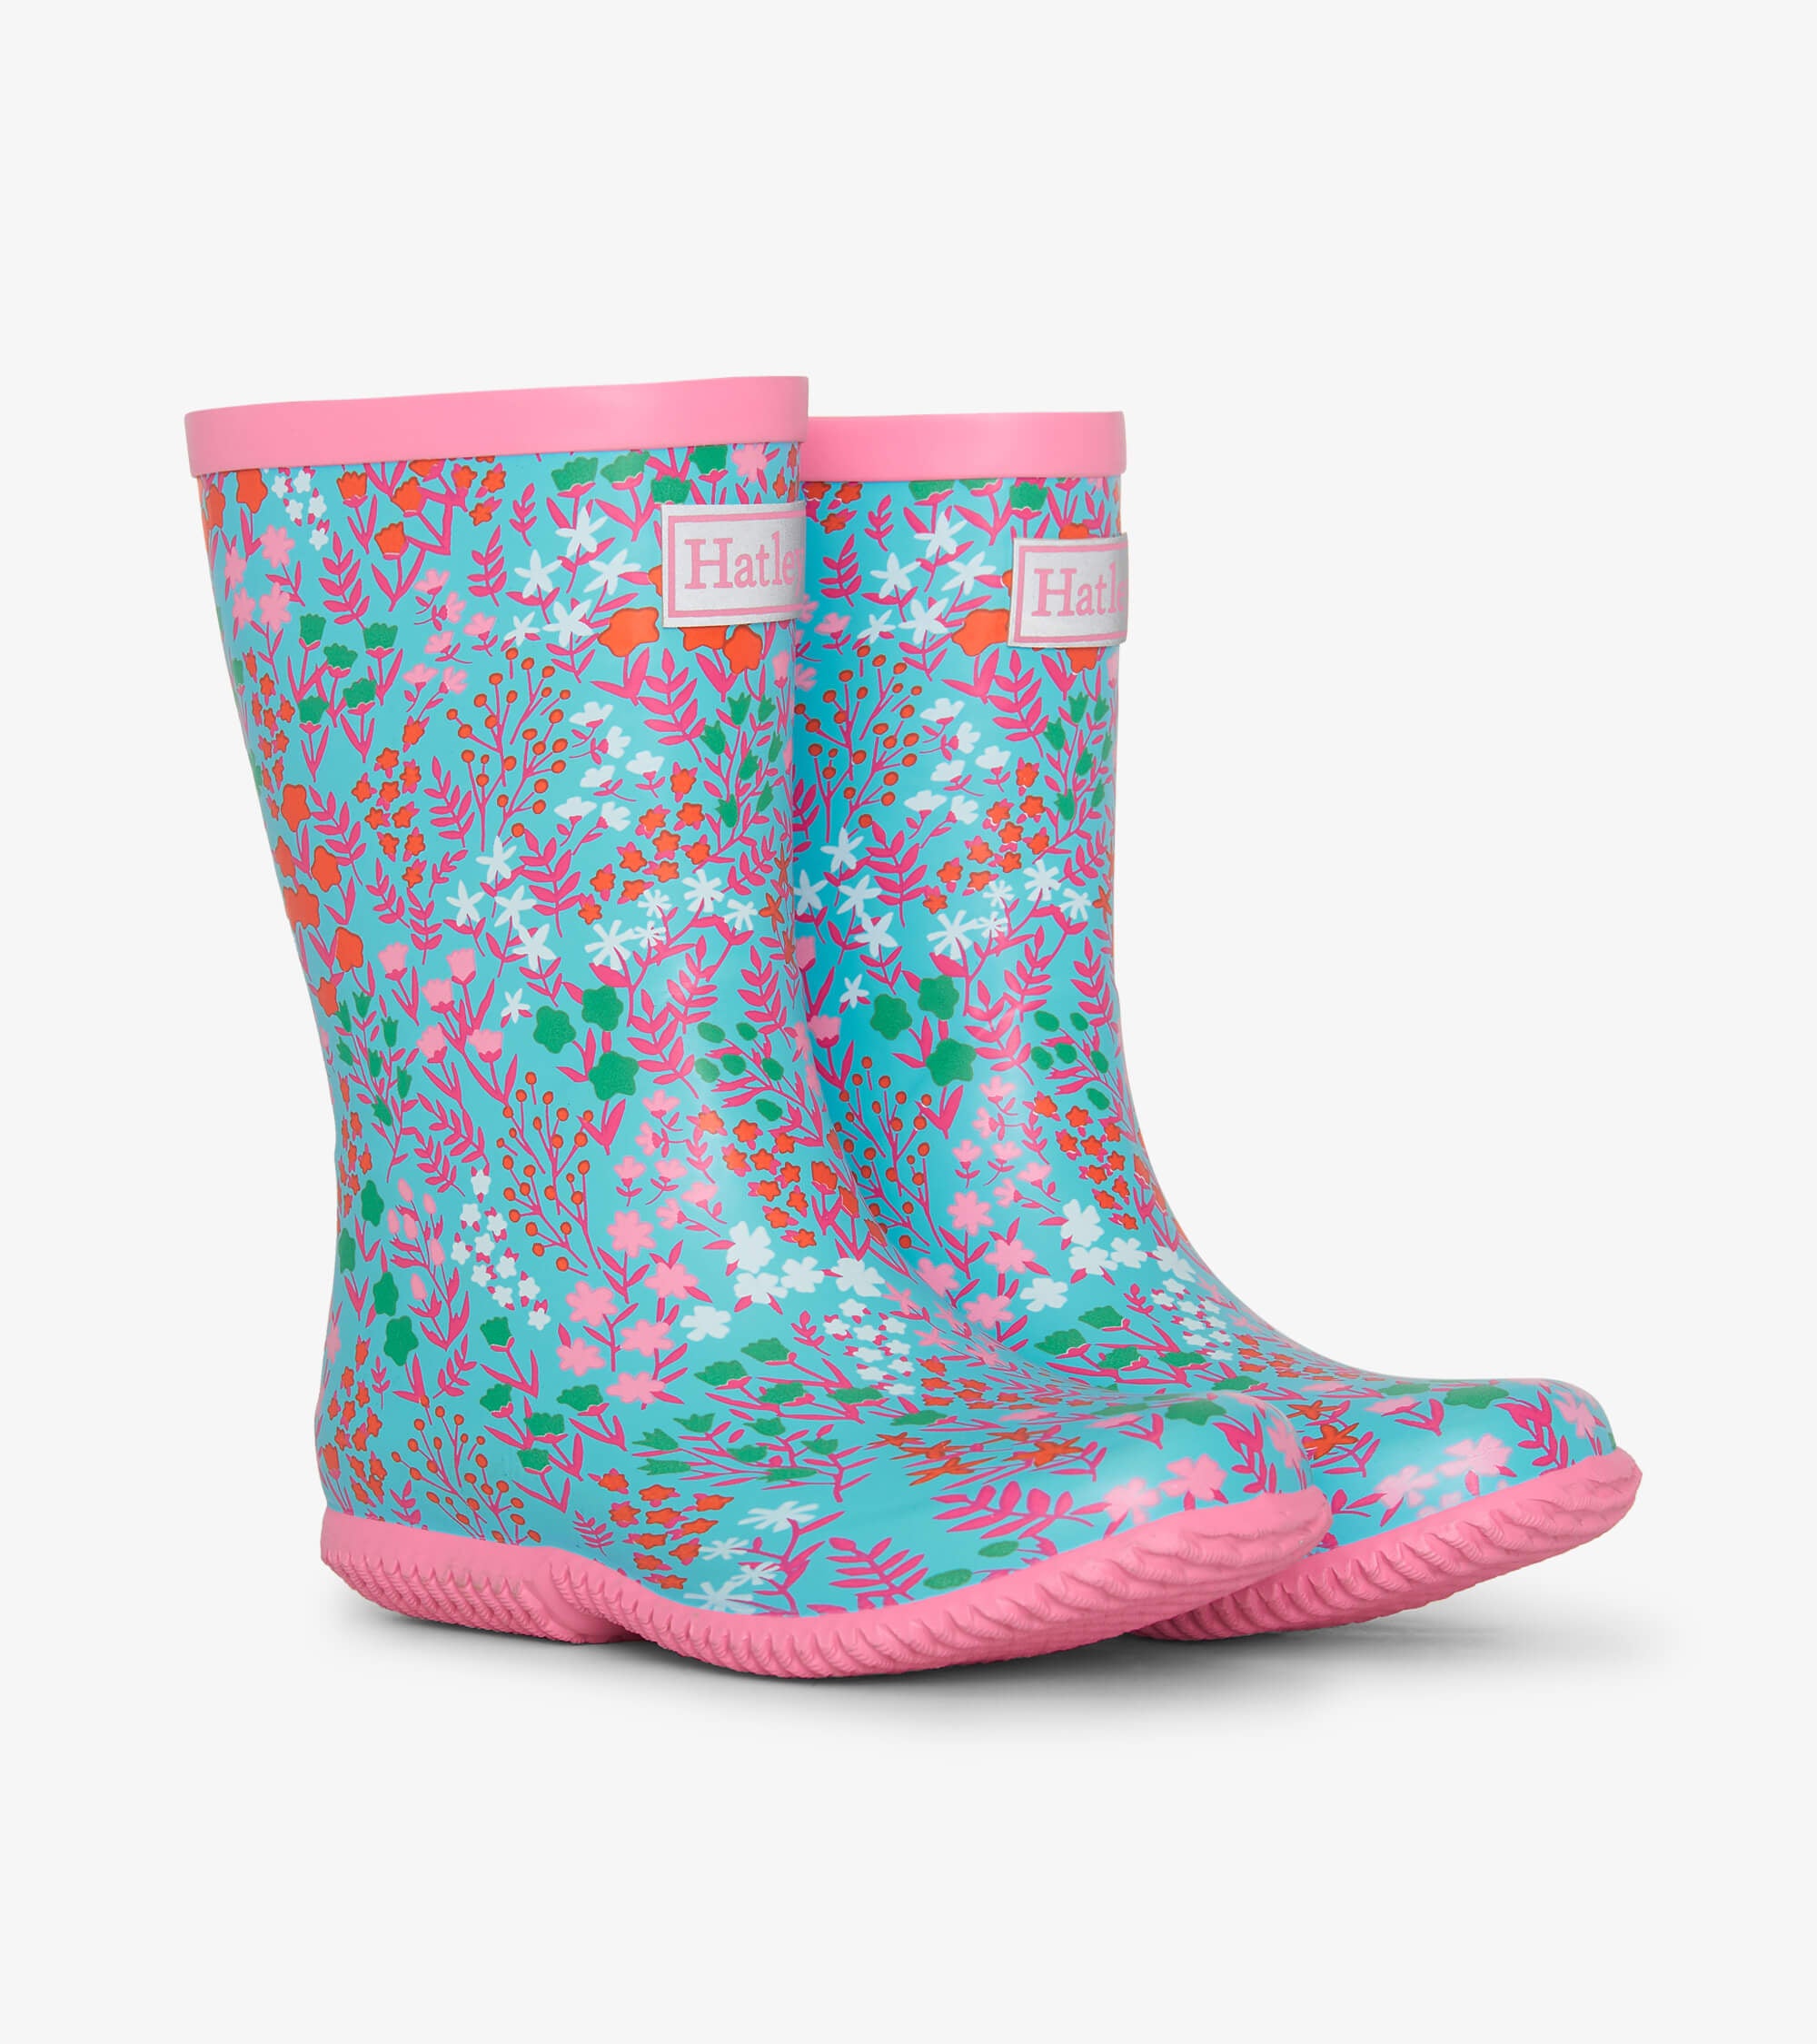 Ditsy Floral Packable Rain Boots